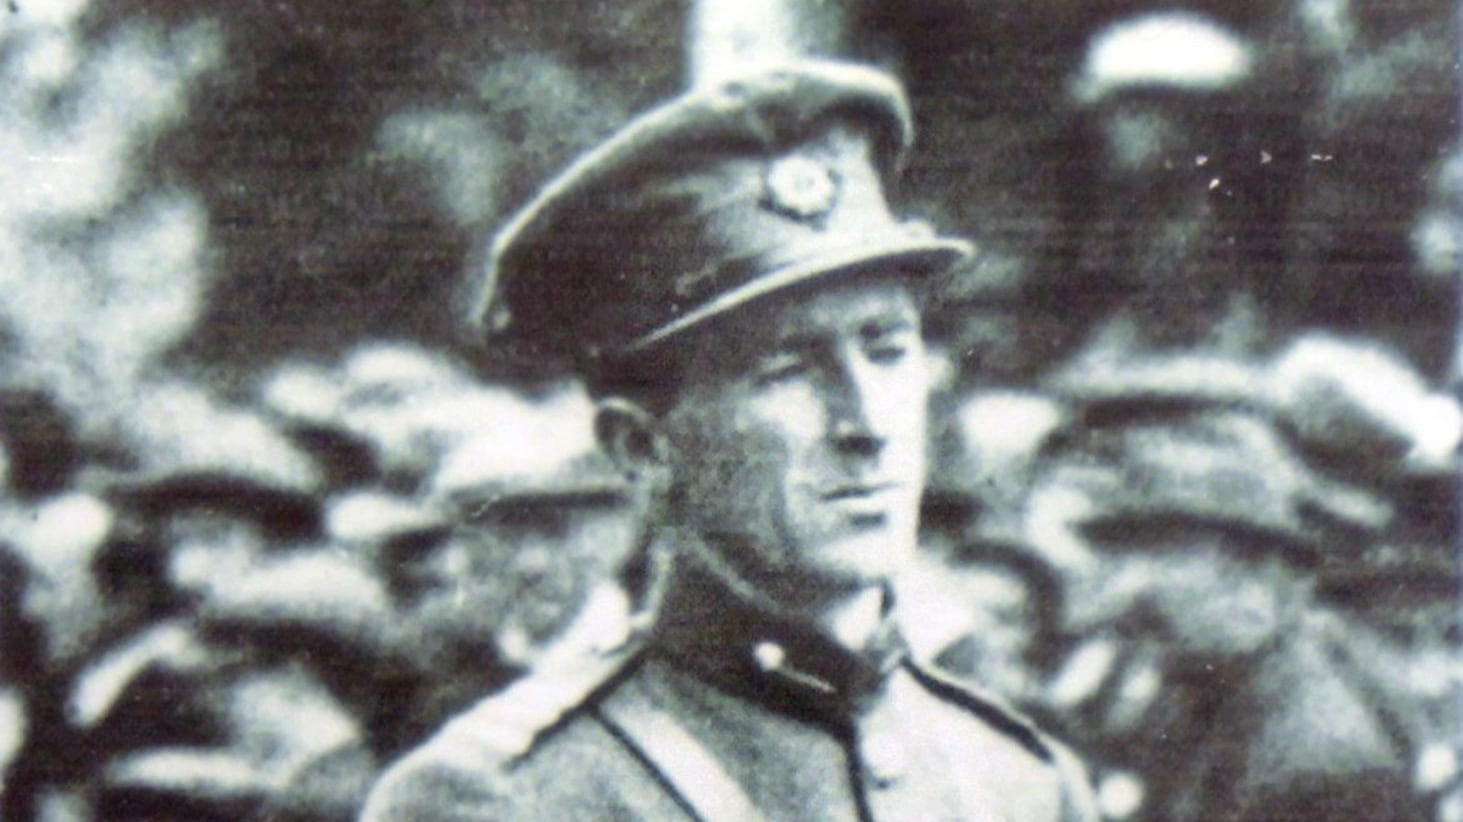 Richard Mulcahy who was Chief of Staff of the Irish Army during the War of Independence. He became Commander in Chief of the Free State Army following the death of Michael Collins. Copy McLaughlin &Acirc;&copy; see Seamus 1916 Donegal feature 15-5-15. 